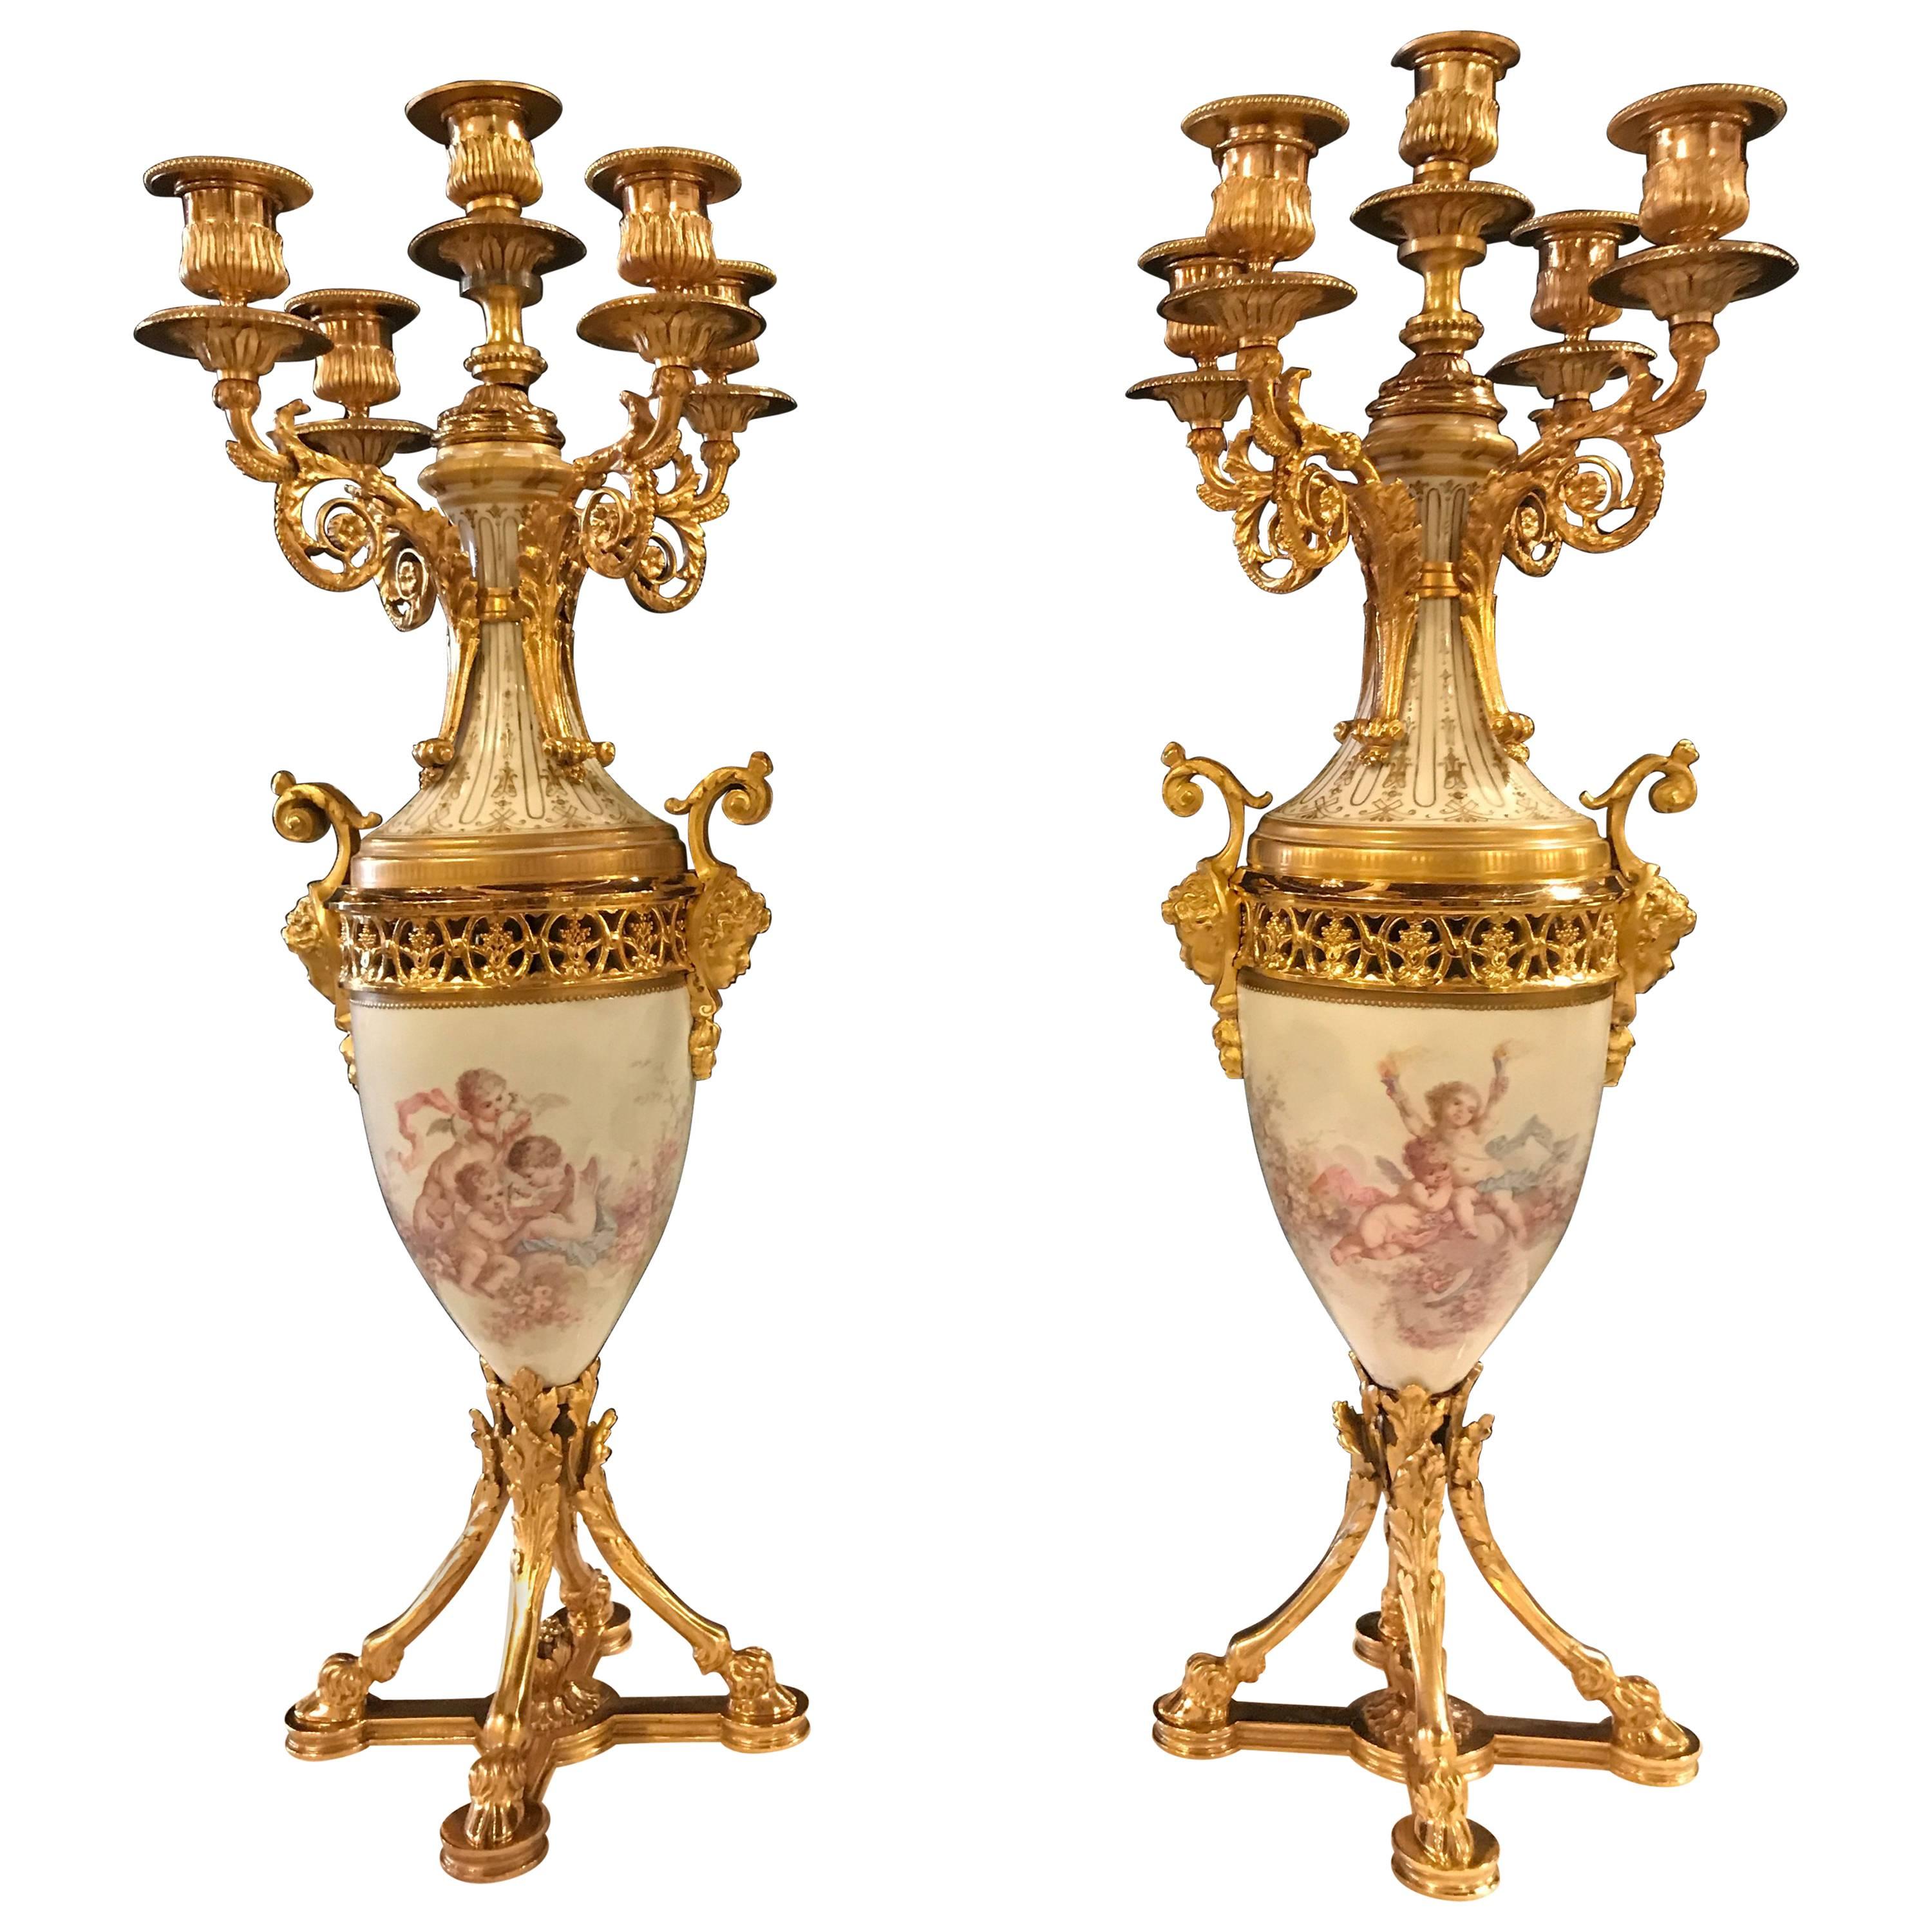 Fine Pair of Gilt Bronze and Porcelain Candelabra with Cherub Painting